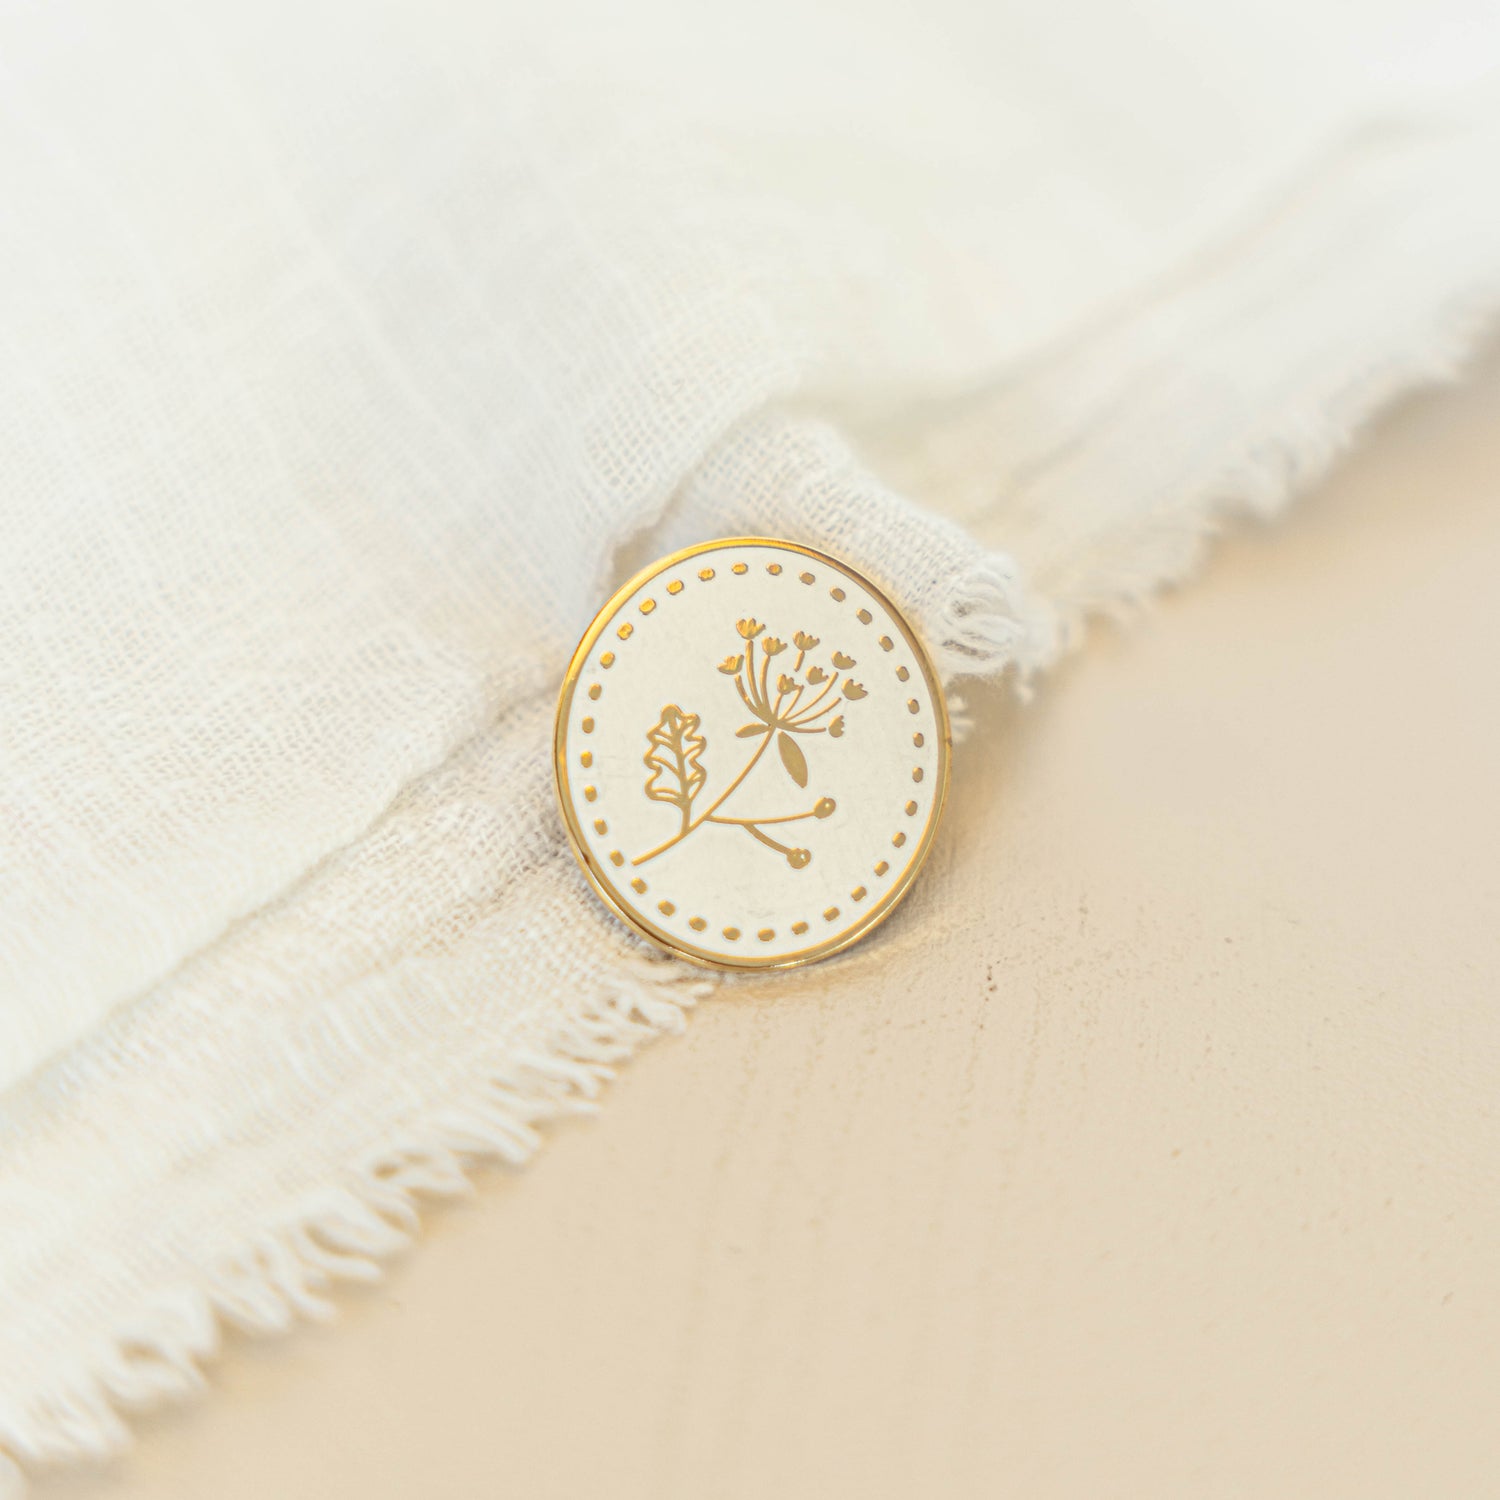 Pin's "Lolilafée"